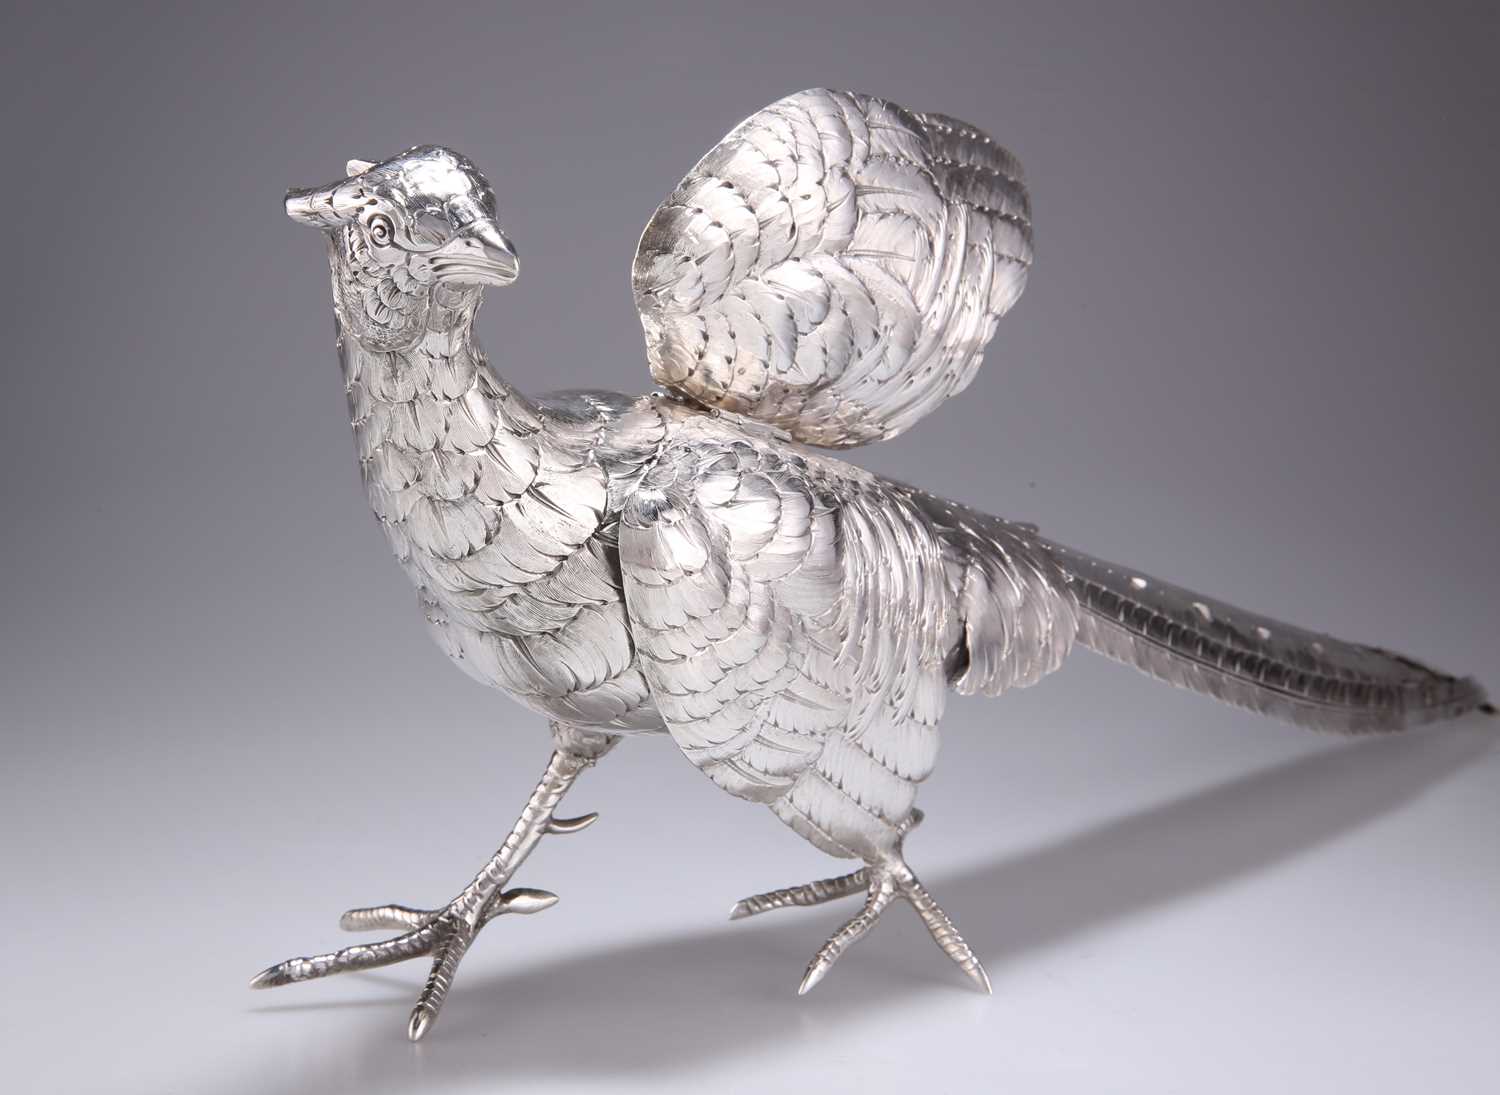 A LARGE GERMAN SILVER PHEASANT TABLE ORNAMENT